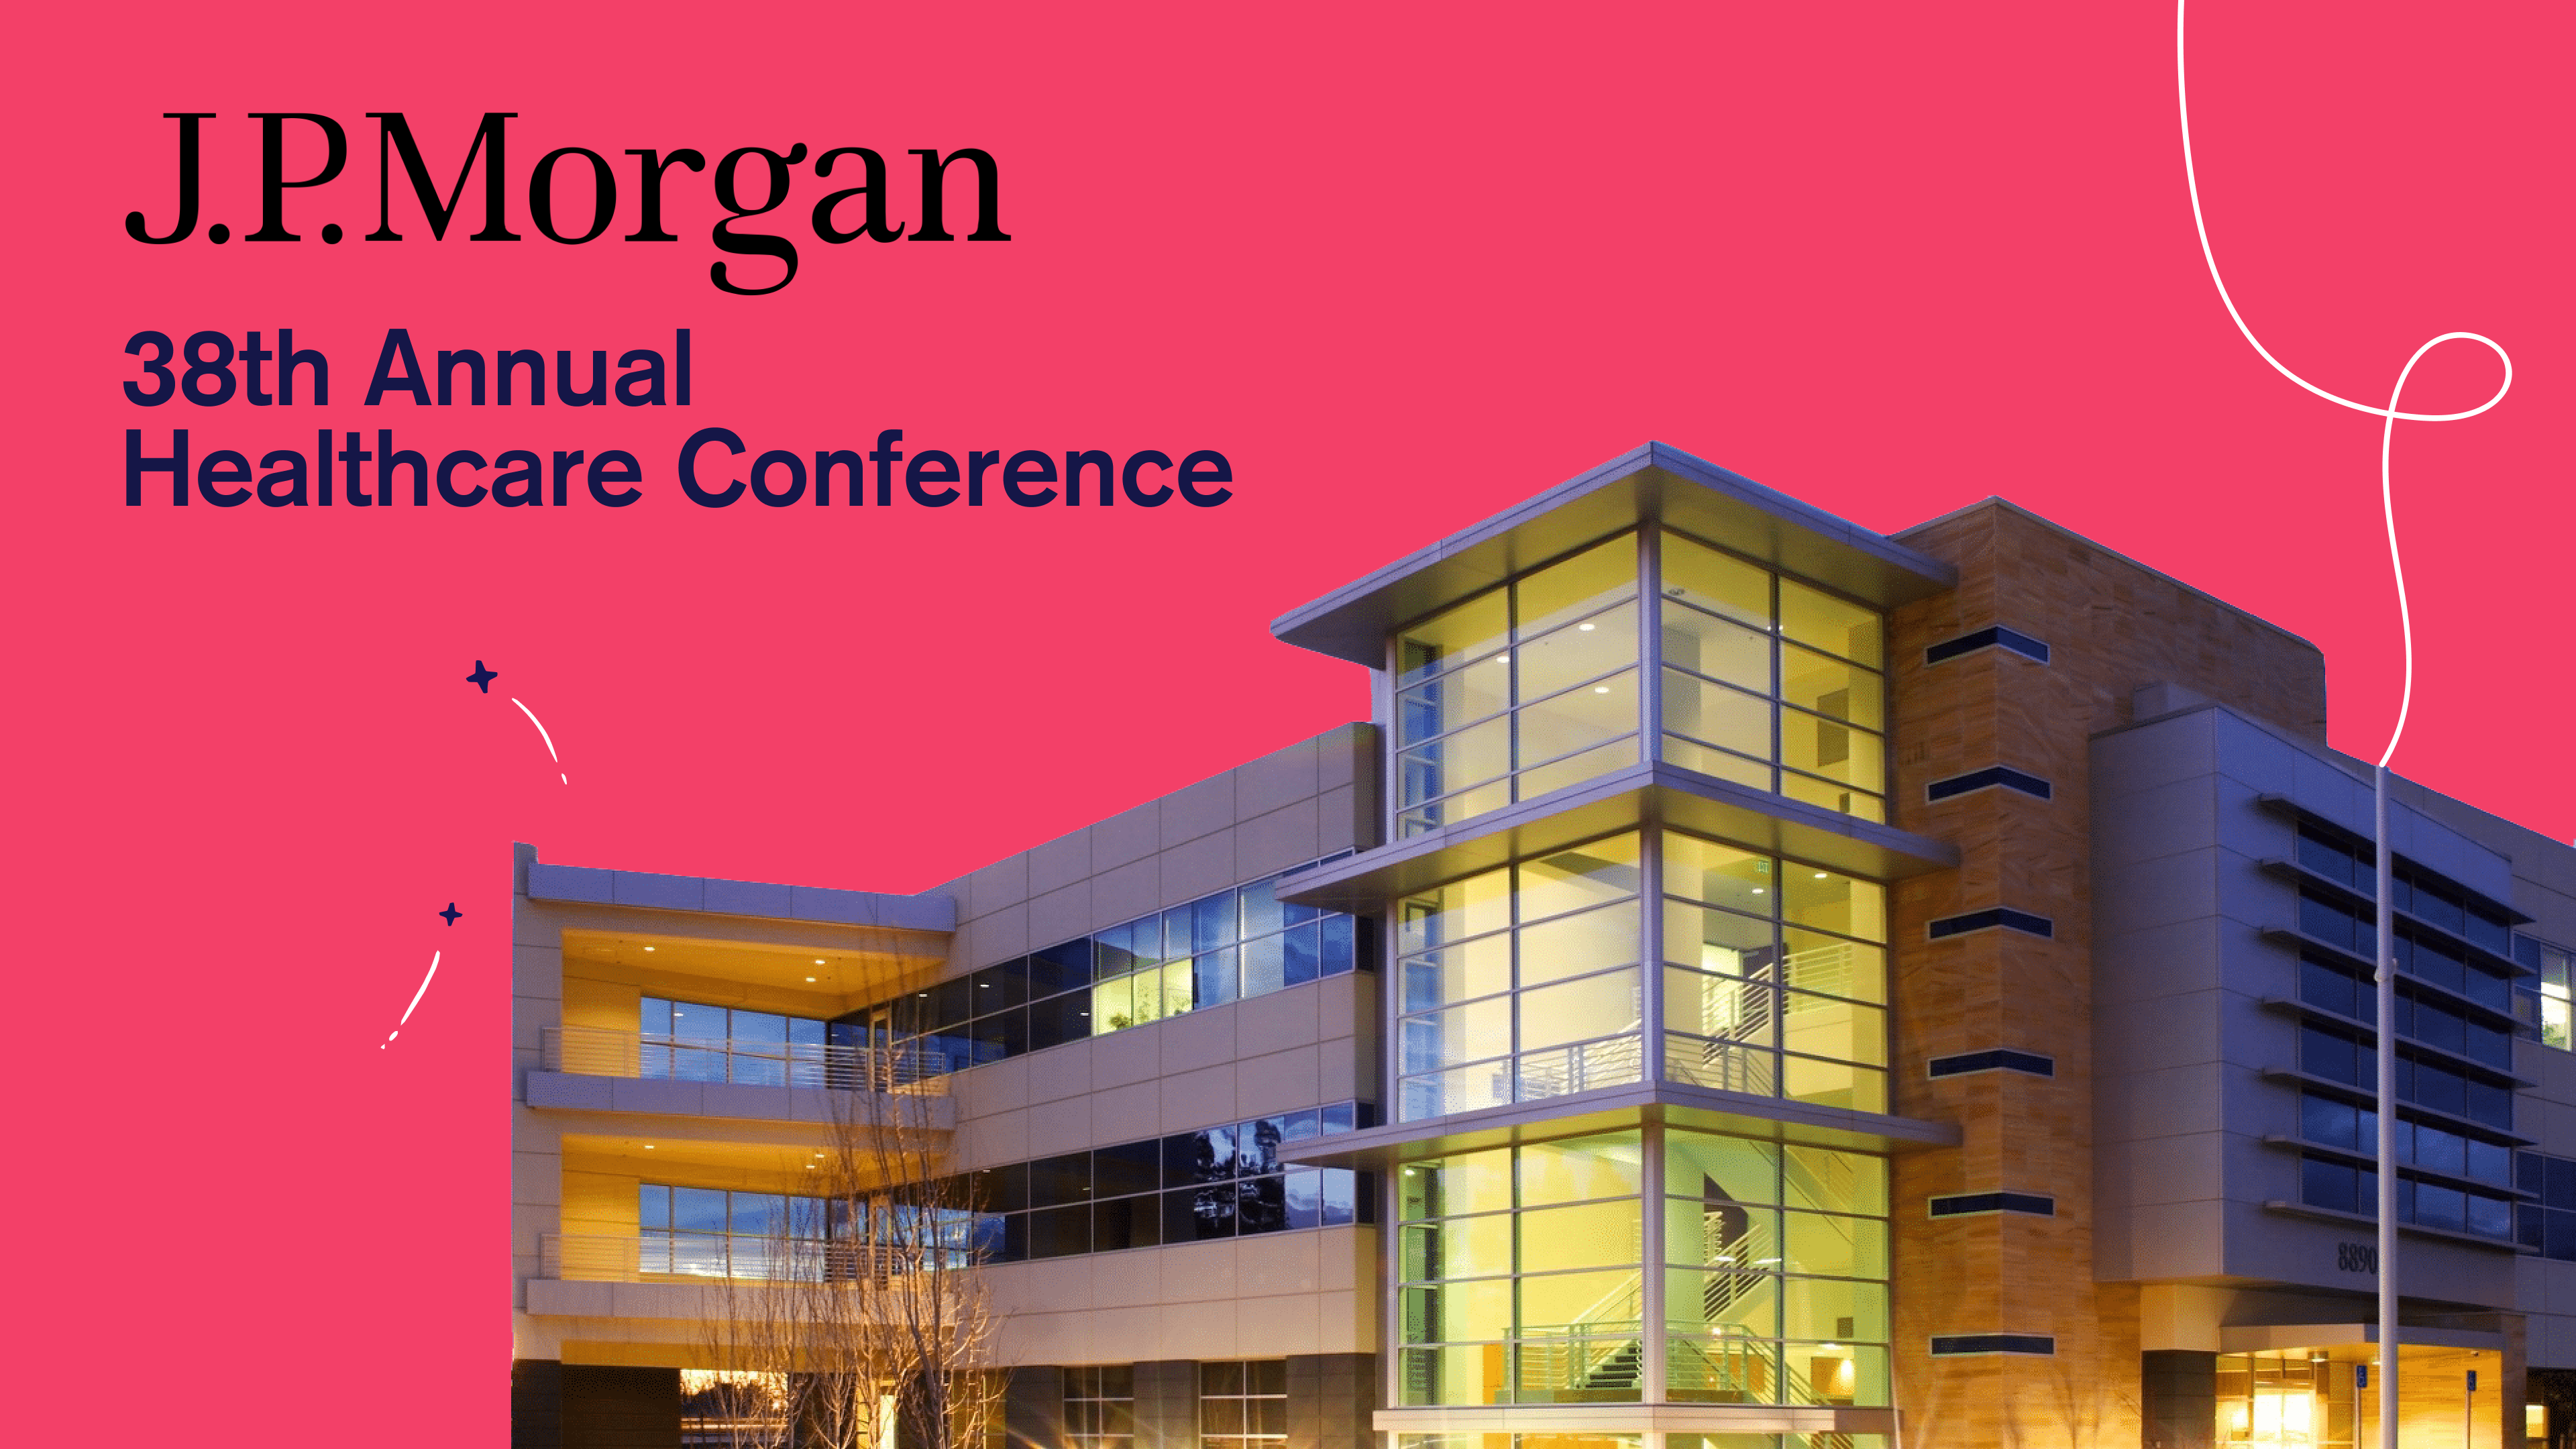 The 5 Trends You Couldn’t Miss at the 2020 J.P. Morgan Healthcare Conference